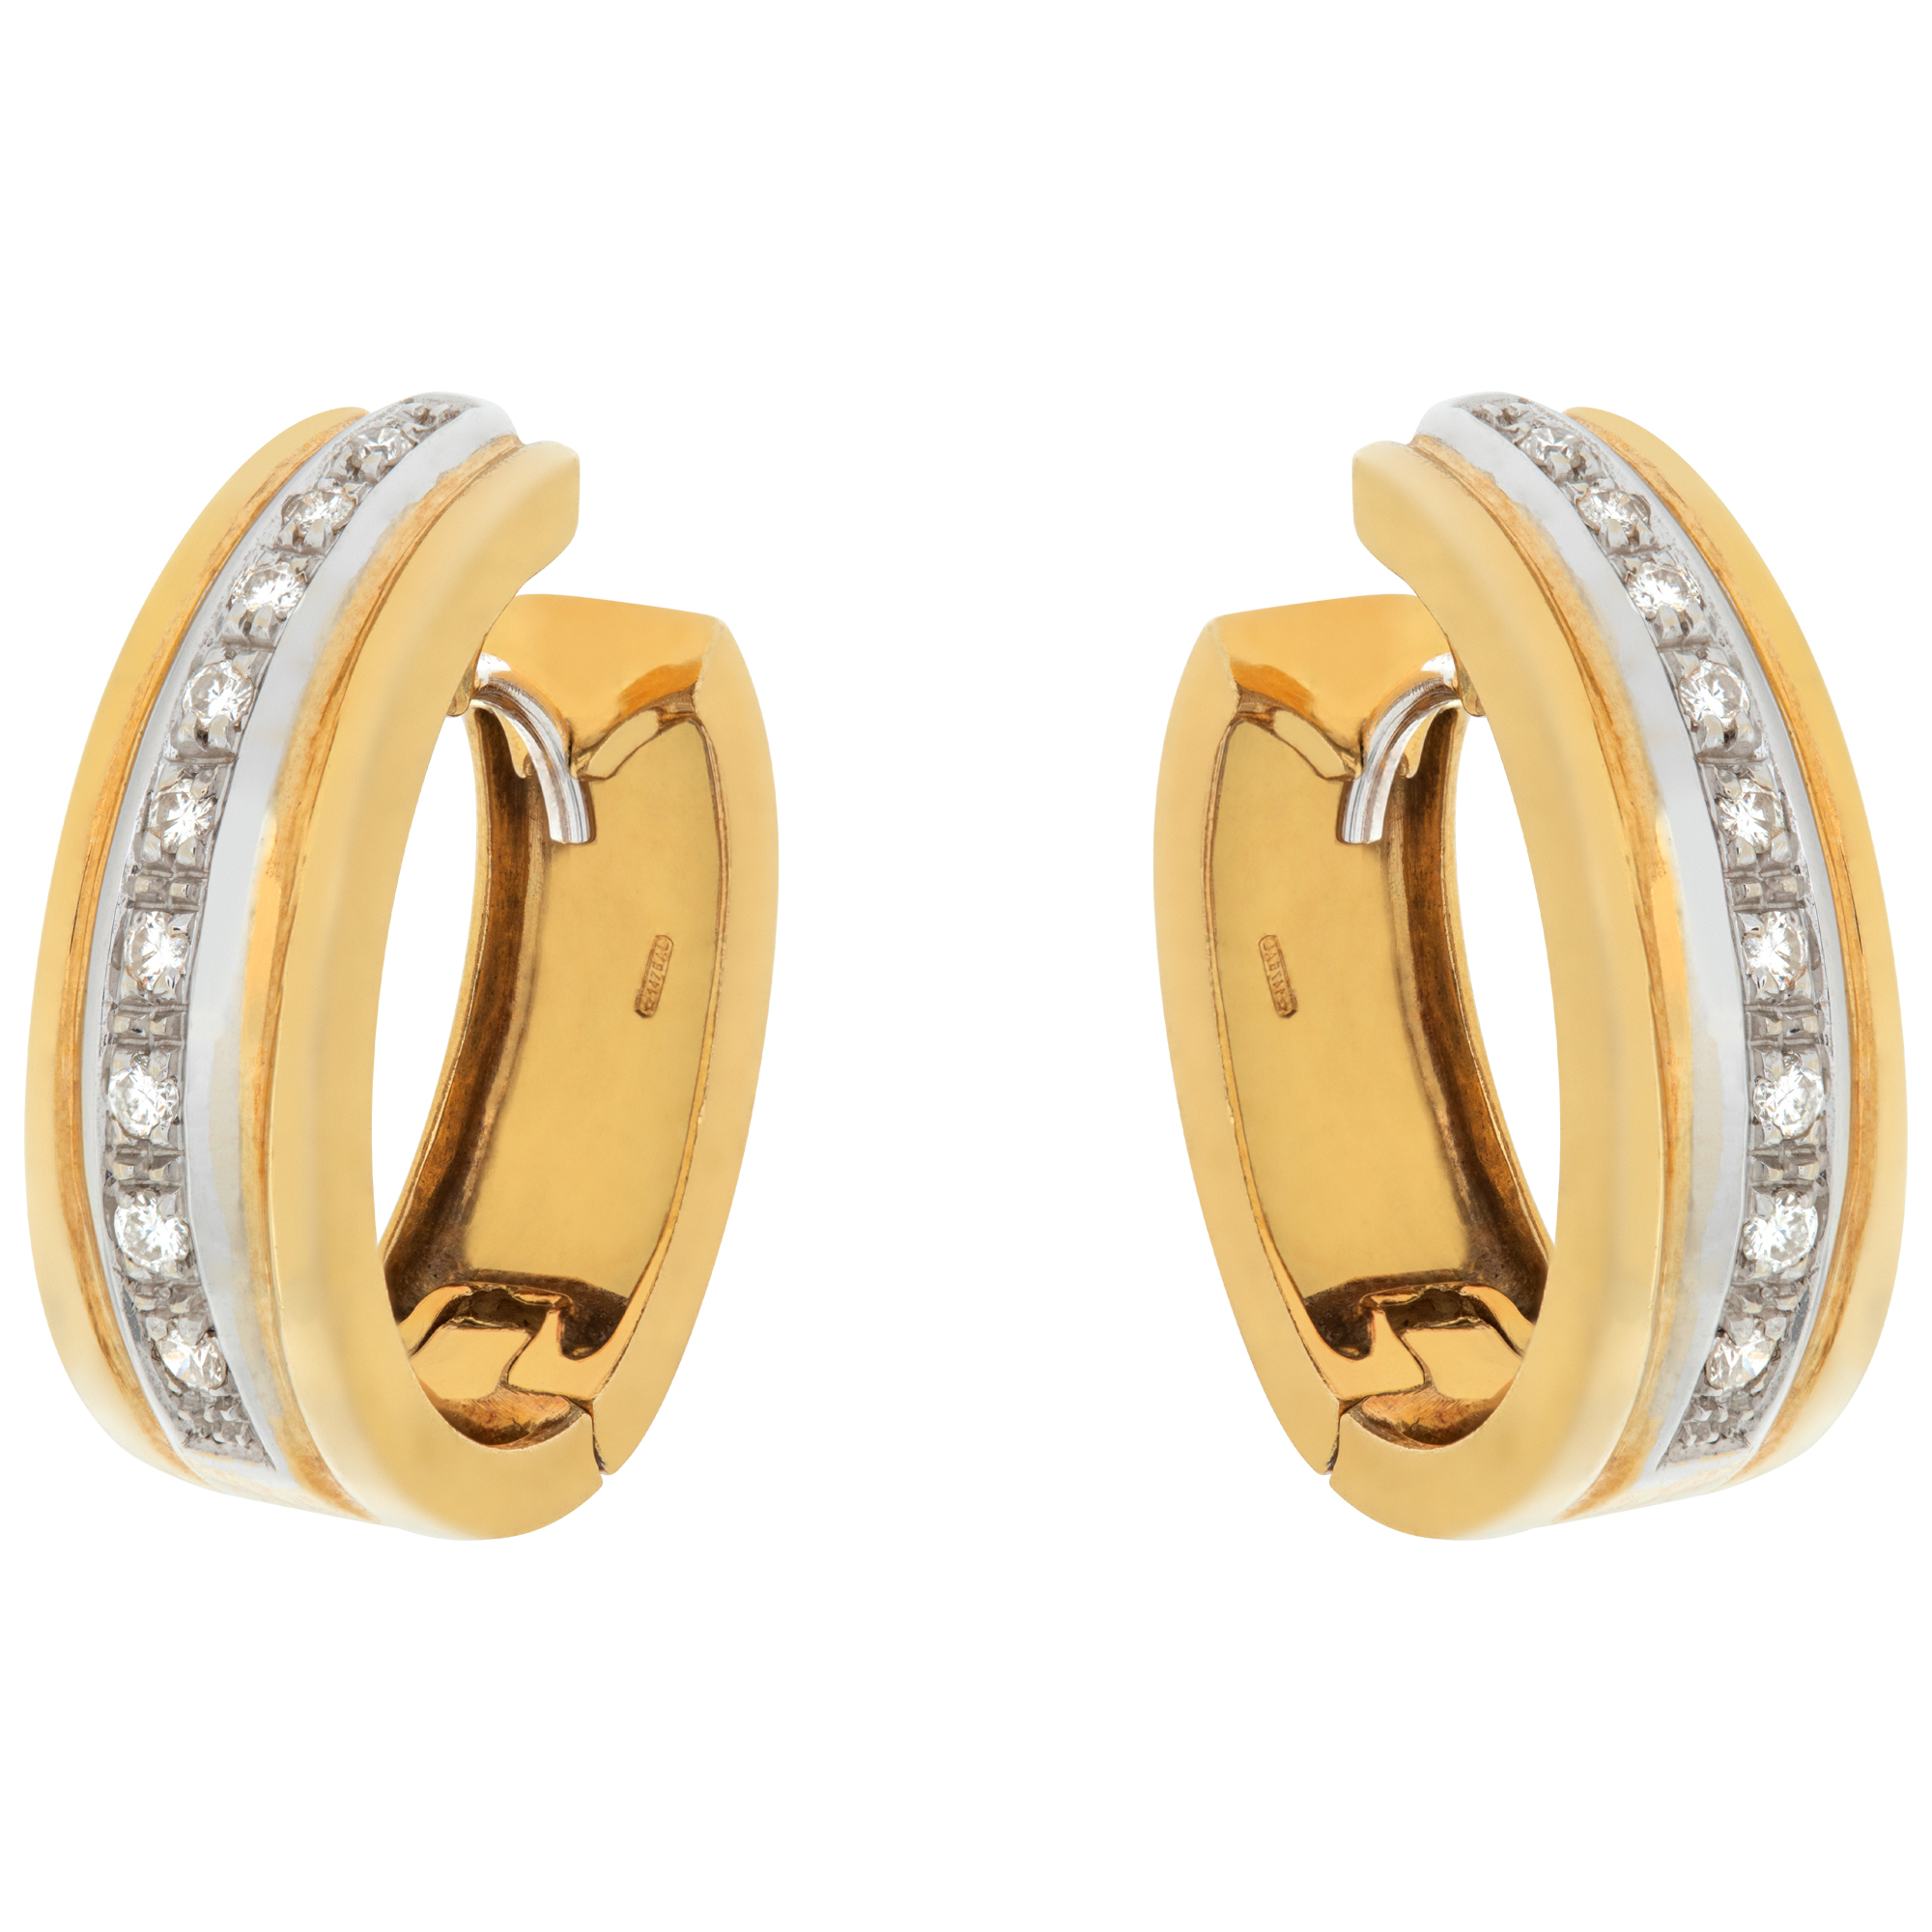 Hanging earrings in 18k white and yellow gold, with 0.40 carats in G-H color, VS-SI clarity.